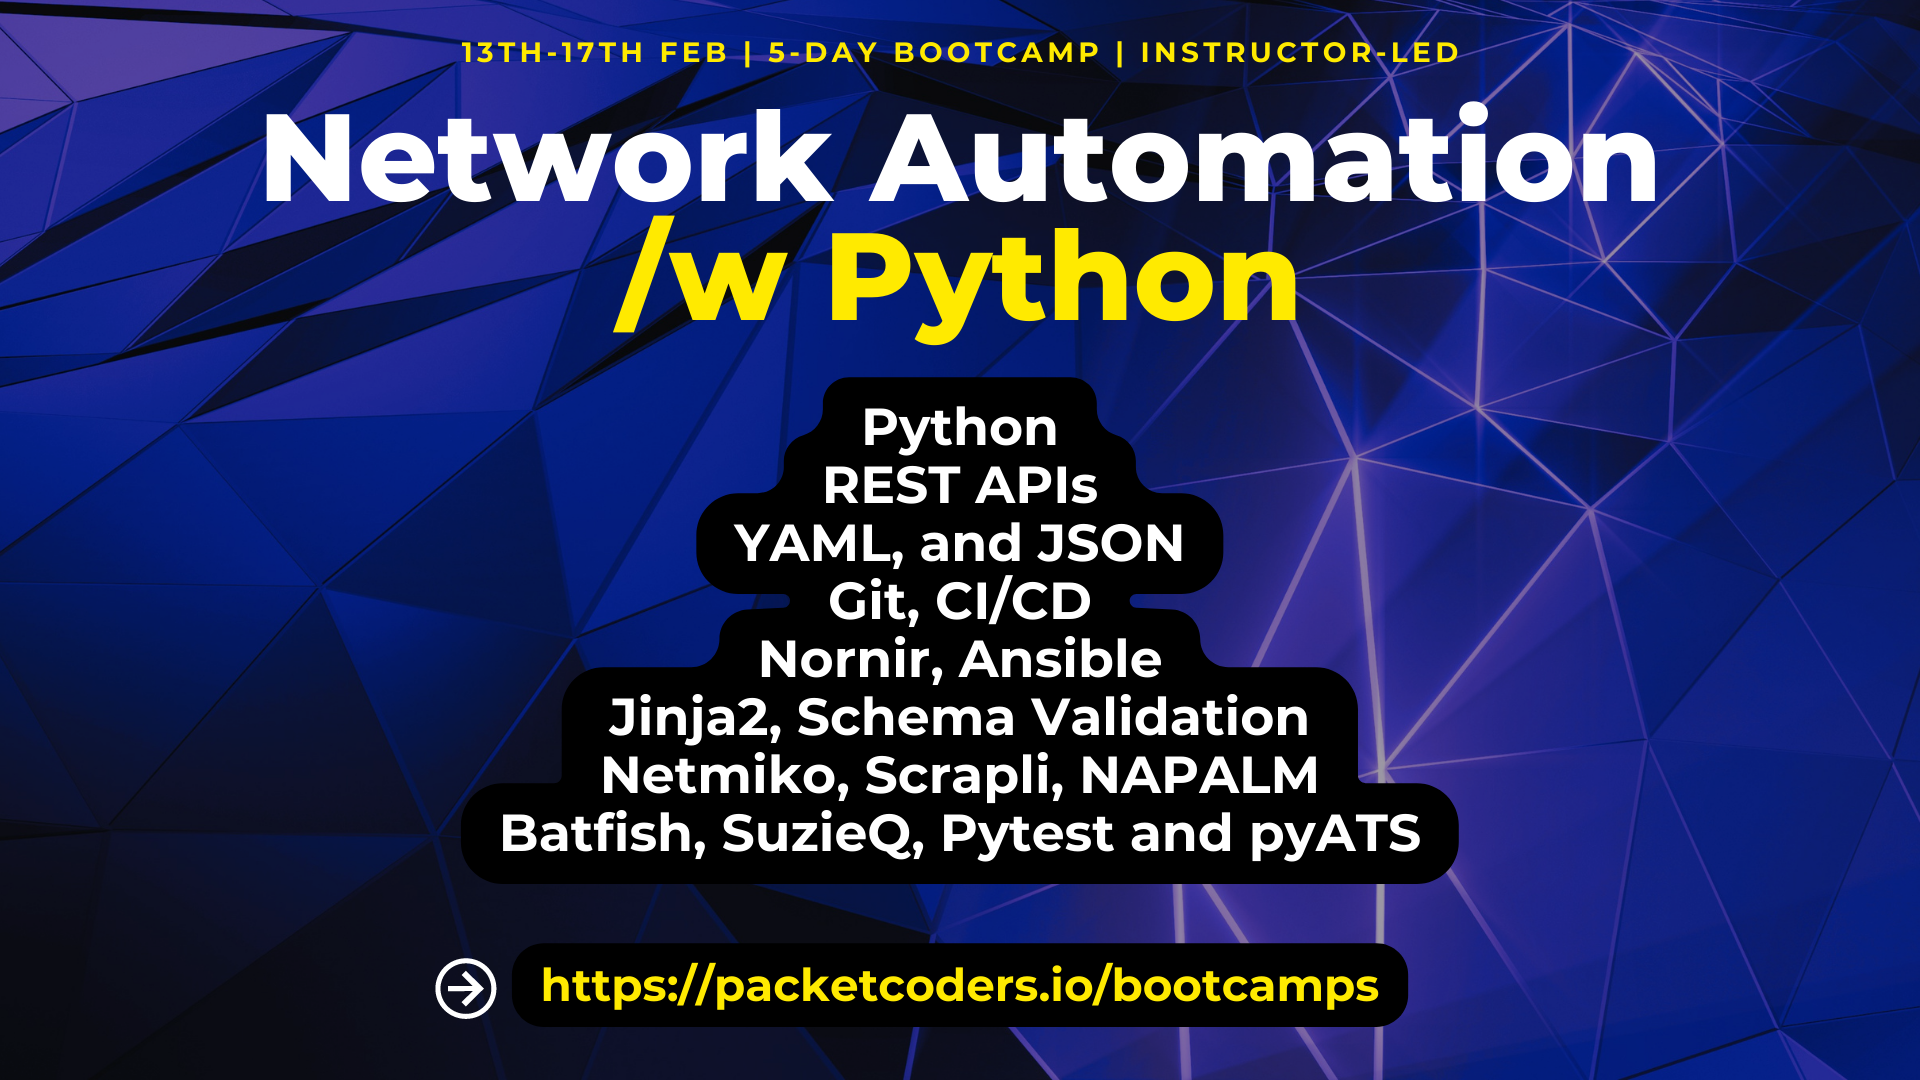 5-Day Network Automation Bootcamp